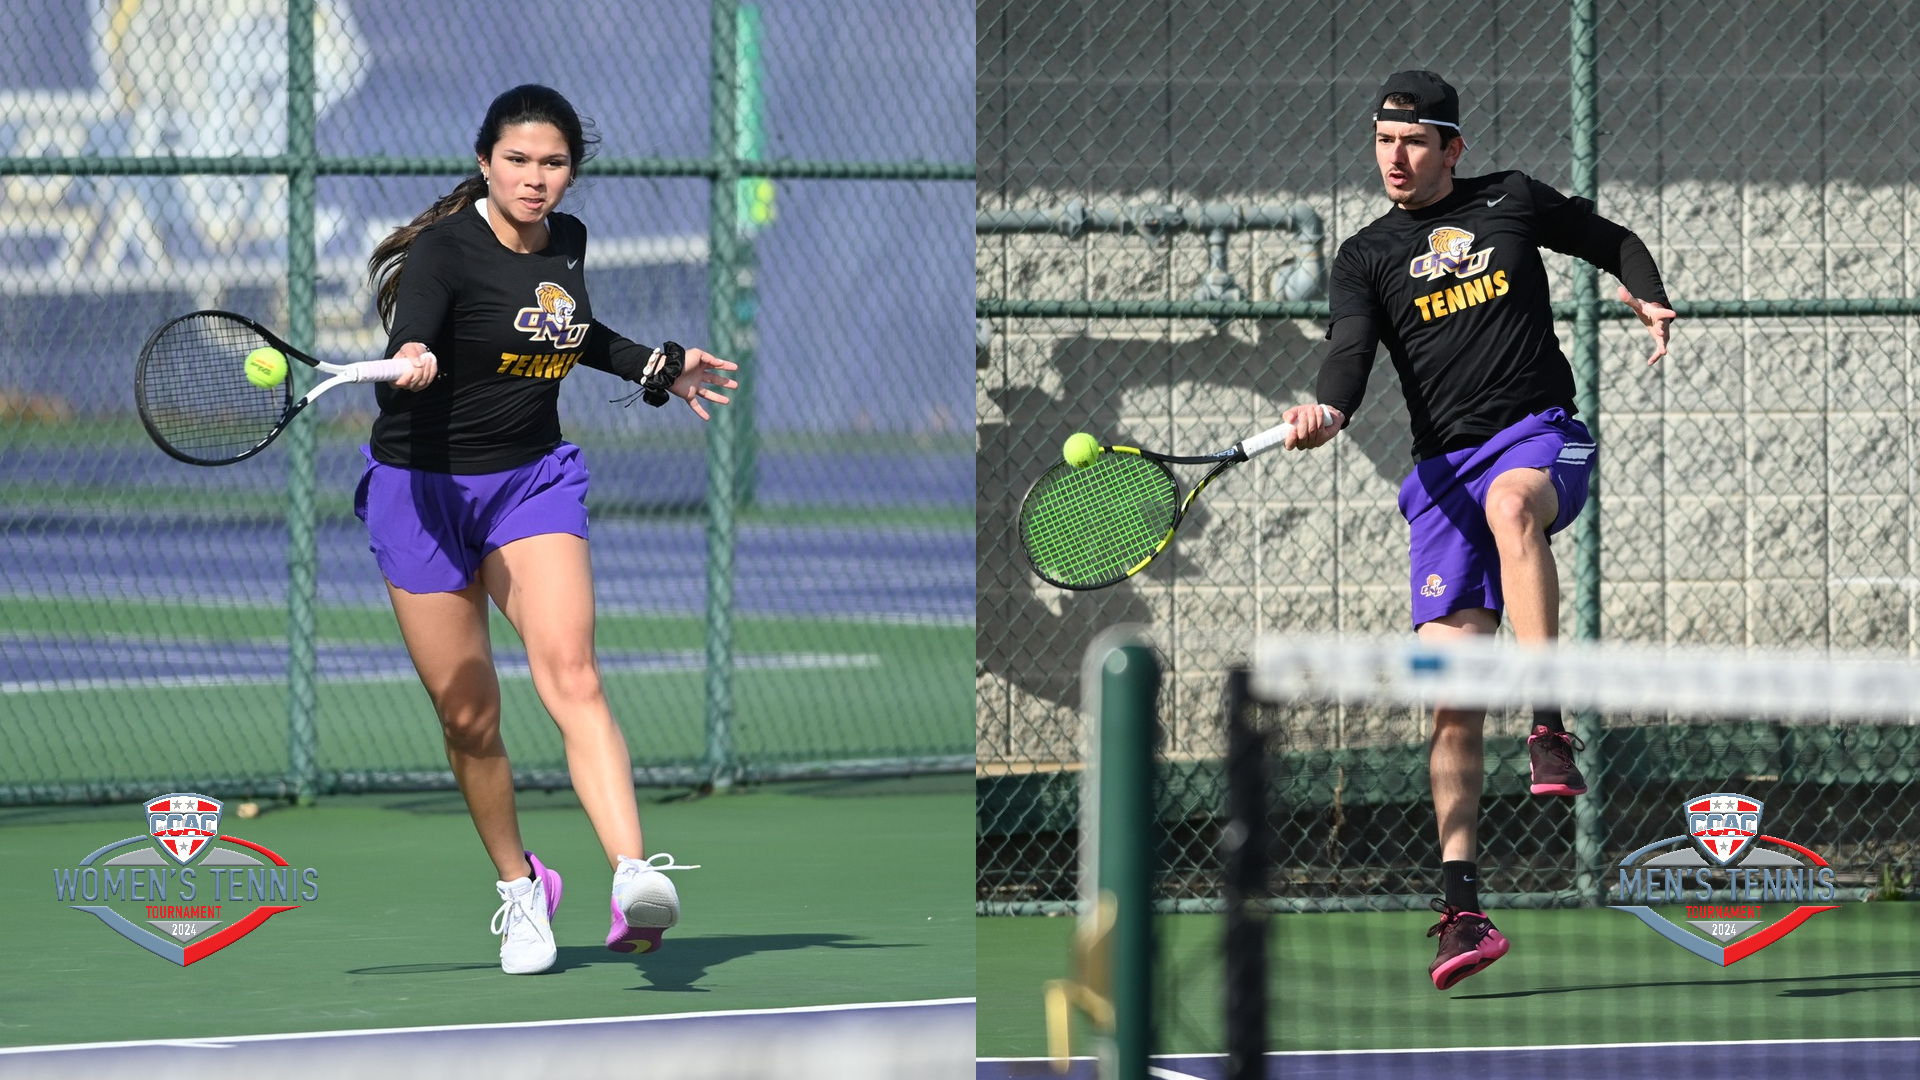 TIGERS GEARING UP FOR CCAC TOURNAMENT QUARTERFINALS